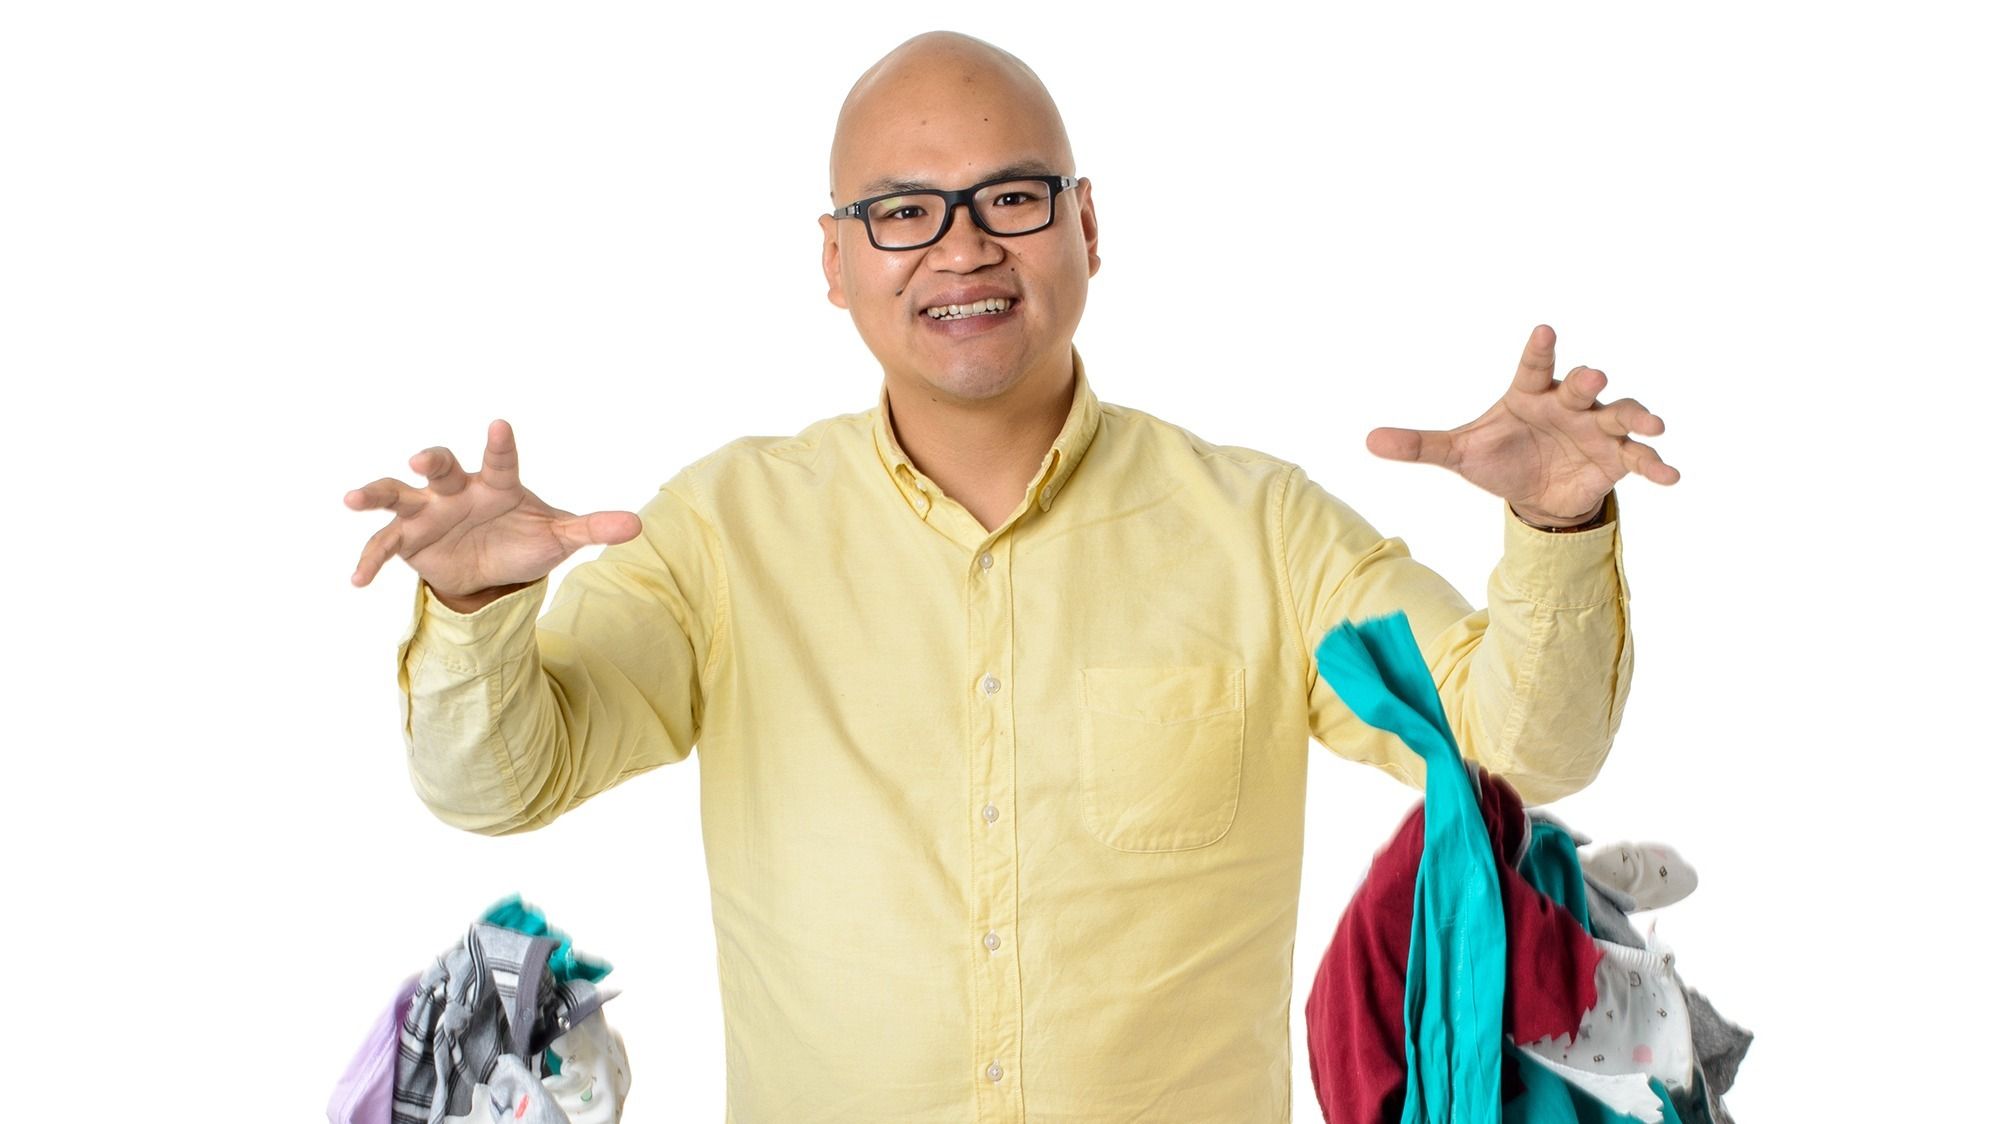 Graduate researcher Jeff Wu dropping handfuls of clothing, the focus of his research.